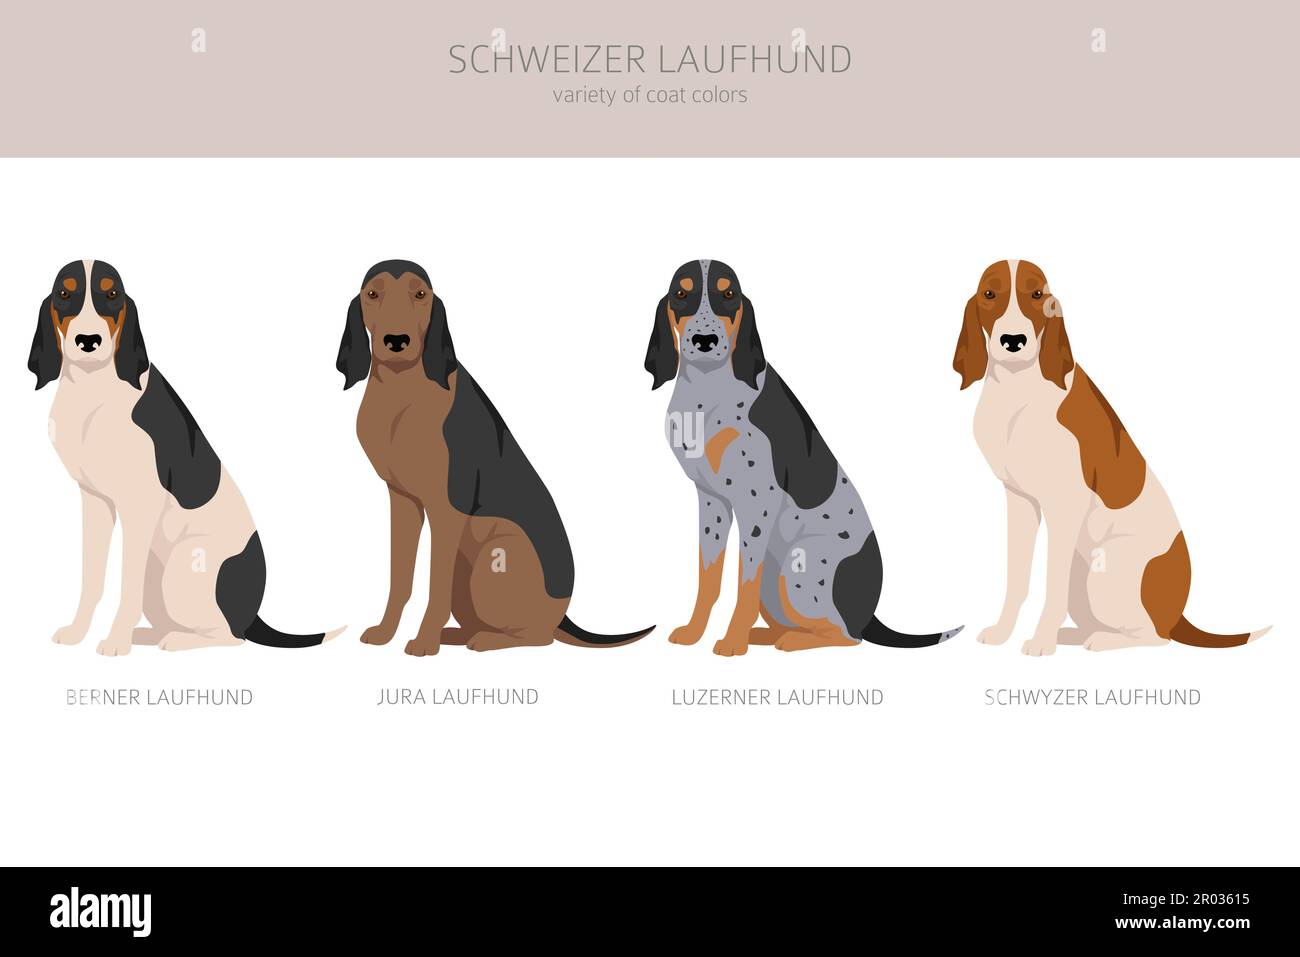 Schwyzer Laufhund, Swiss Hound clipart. All coat colors set.  All dog breeds characteristics infographic. Vector illustration Stock Vector